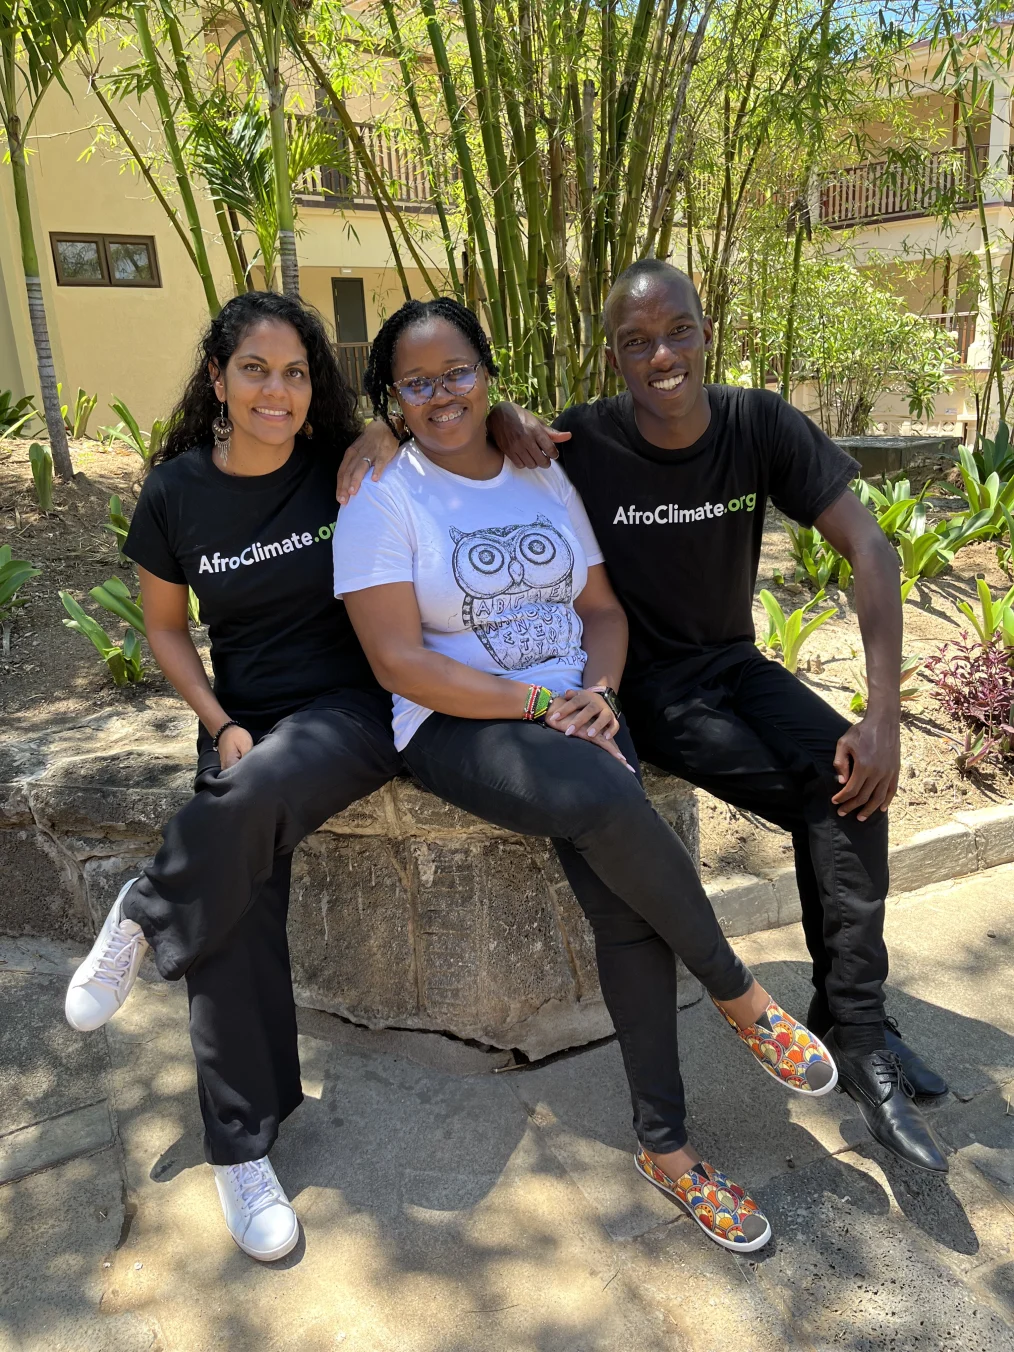 Nassima Sadar-Gravier, a woman with a medium skin tone sits to the left of Susan Mbalu, a Black woman with a deep skin tone, and Joseph Nguthiru, a Black man with a deep skin tone. Nassima and Joseph are wearing shirts that read, “AfroClimate.org.”